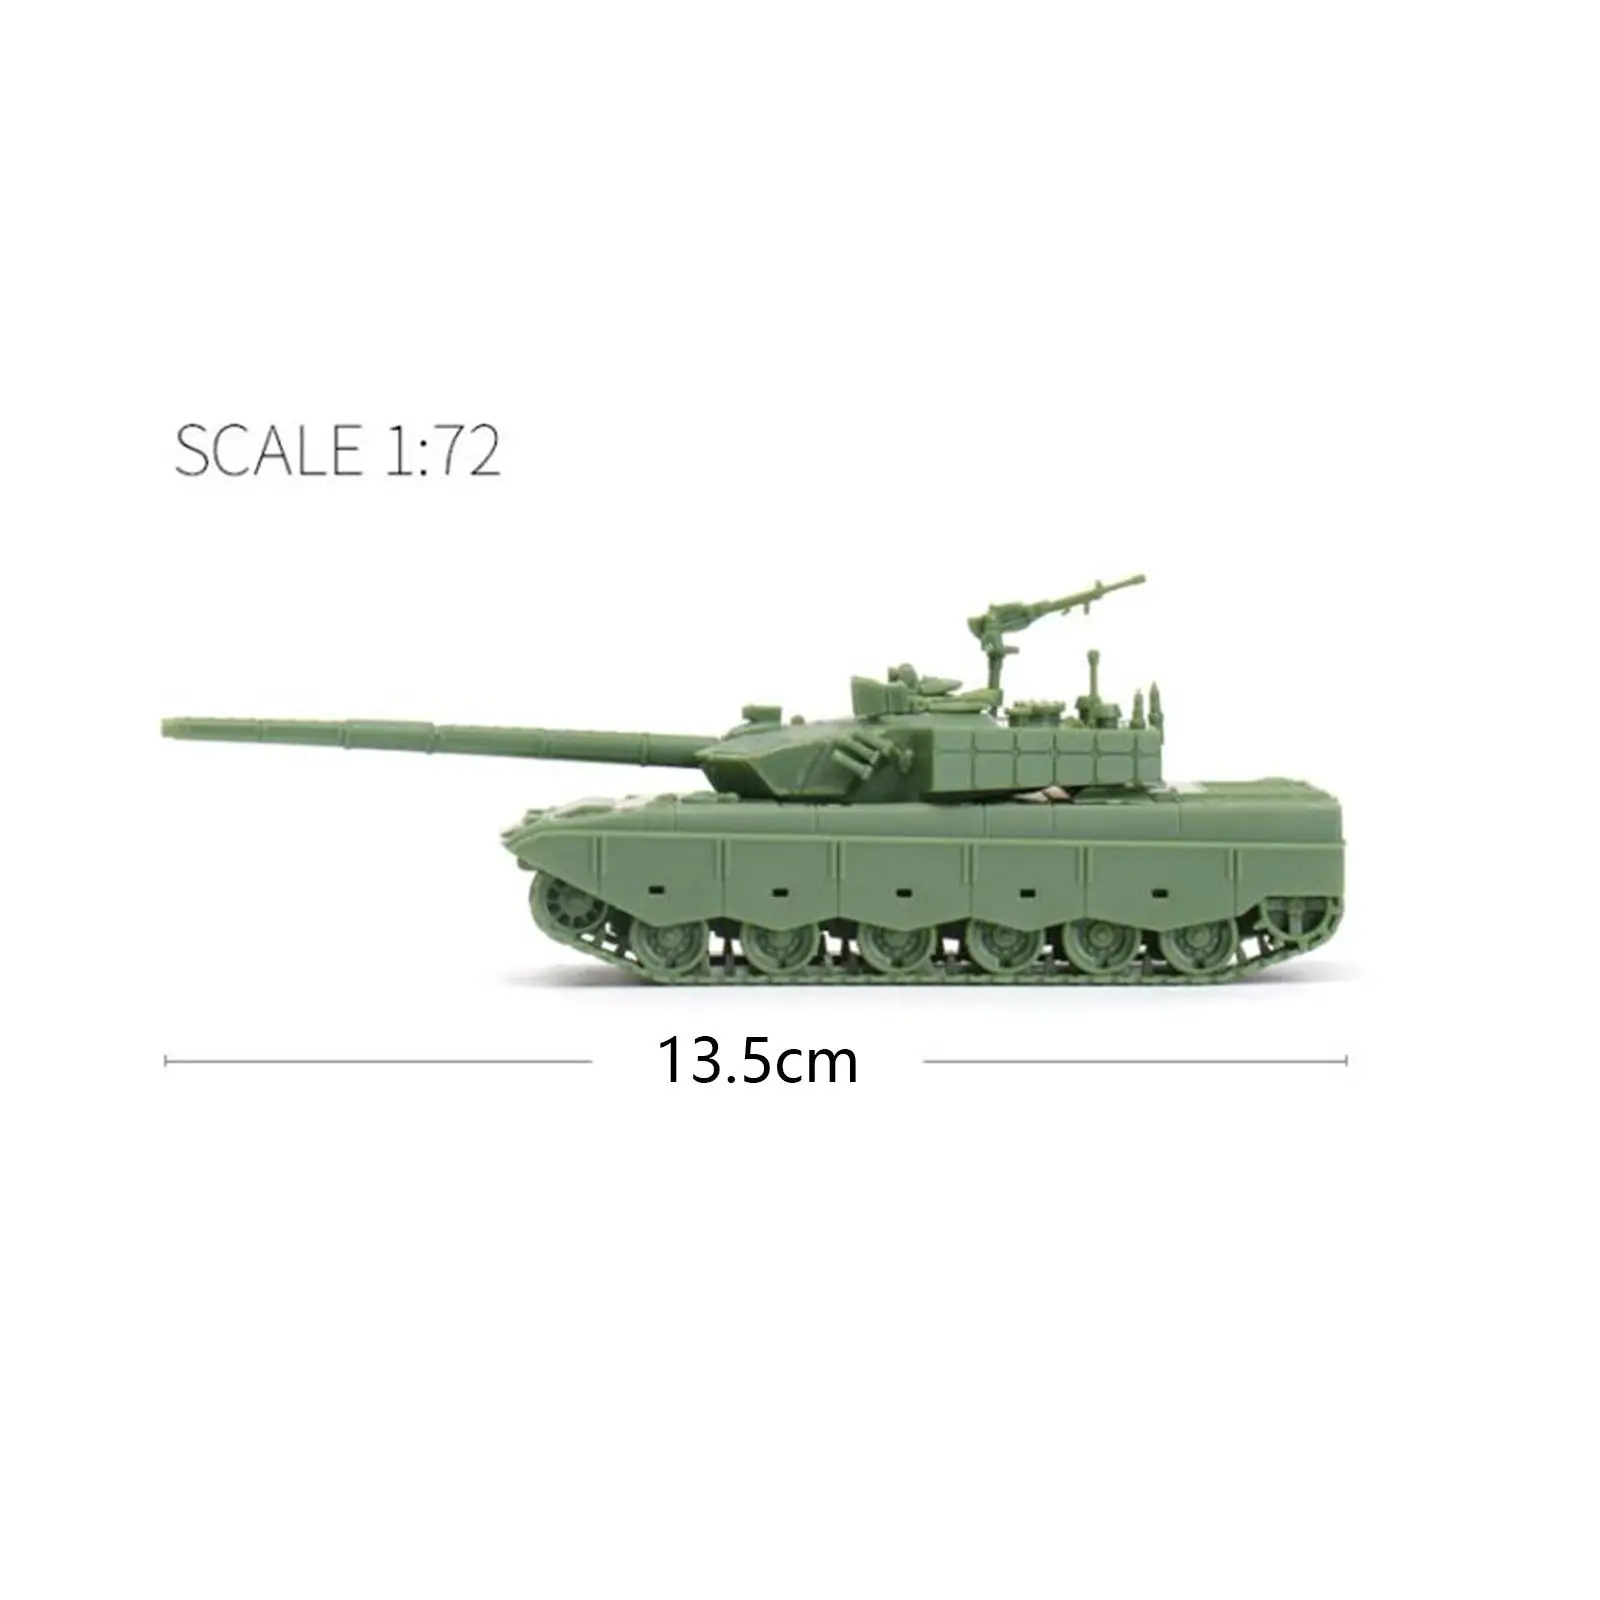 1/72 Scale Puzzle Tank Model Craft Armored Tank Toy Type 96 Main Battle Tank for Gift Tabletop Decor Party Favors Table Scene